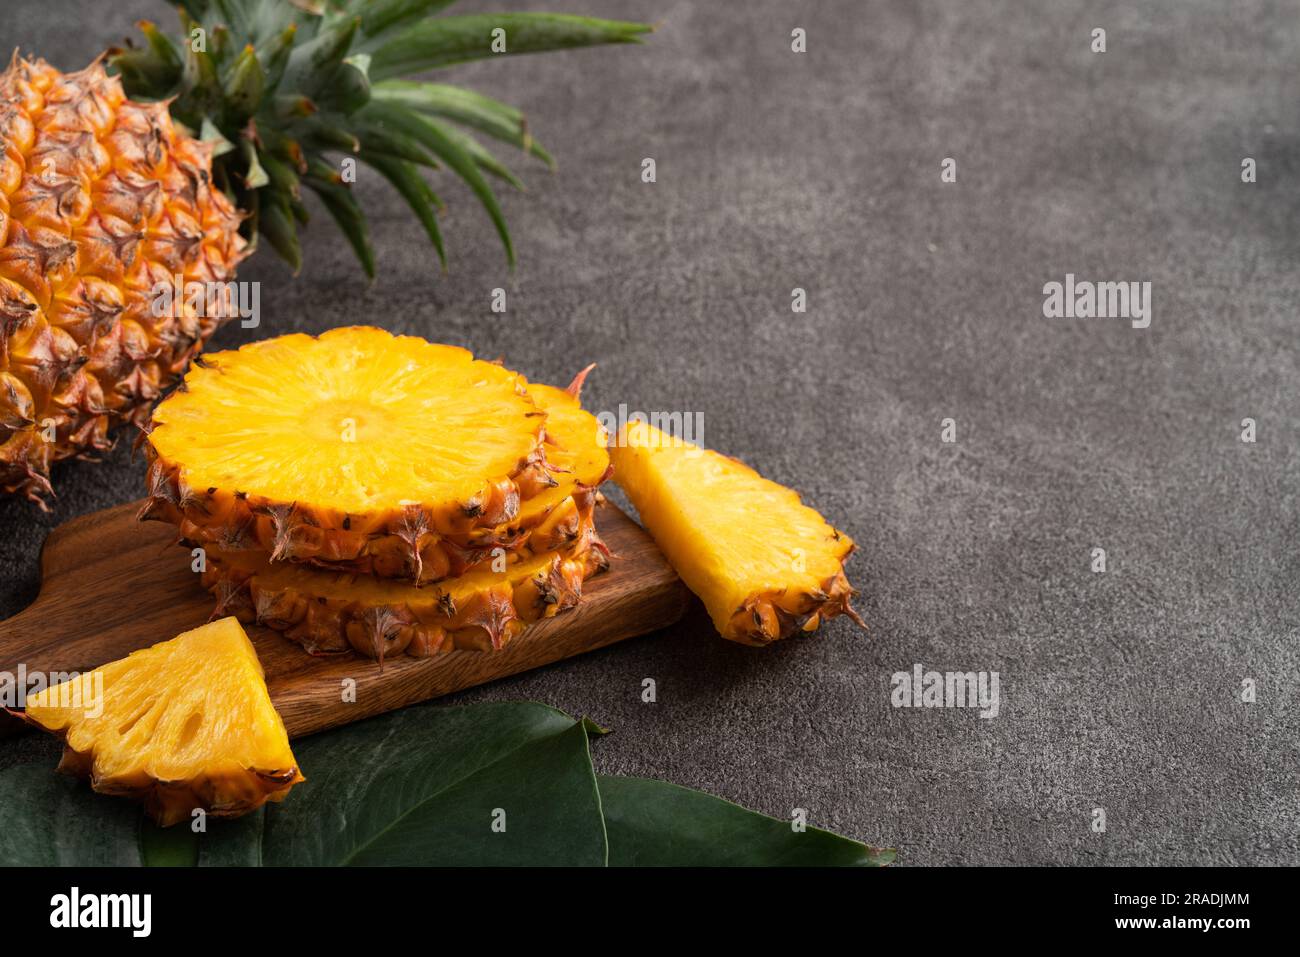 Fresh cut sliced juicy pineapple in a plate over dark gray table background. Stock Photo